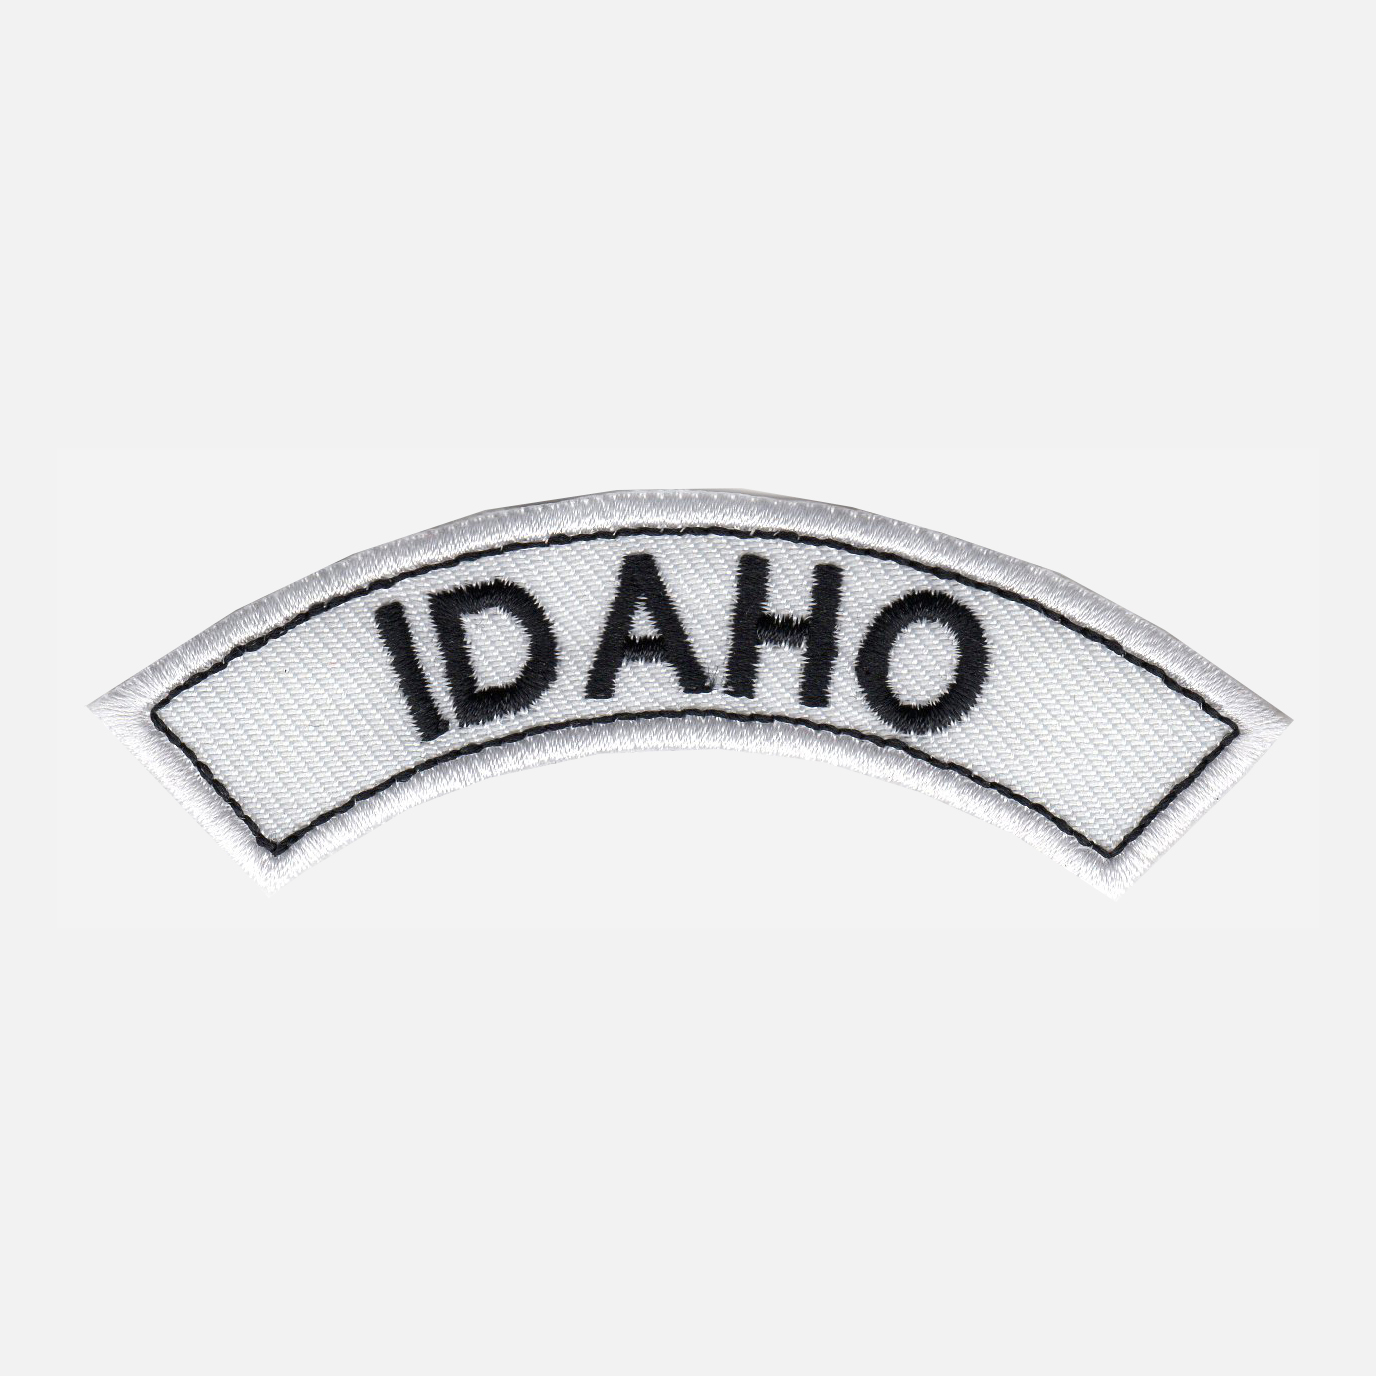 Idaho Mini Top Rocker Embroidered Vest Patch